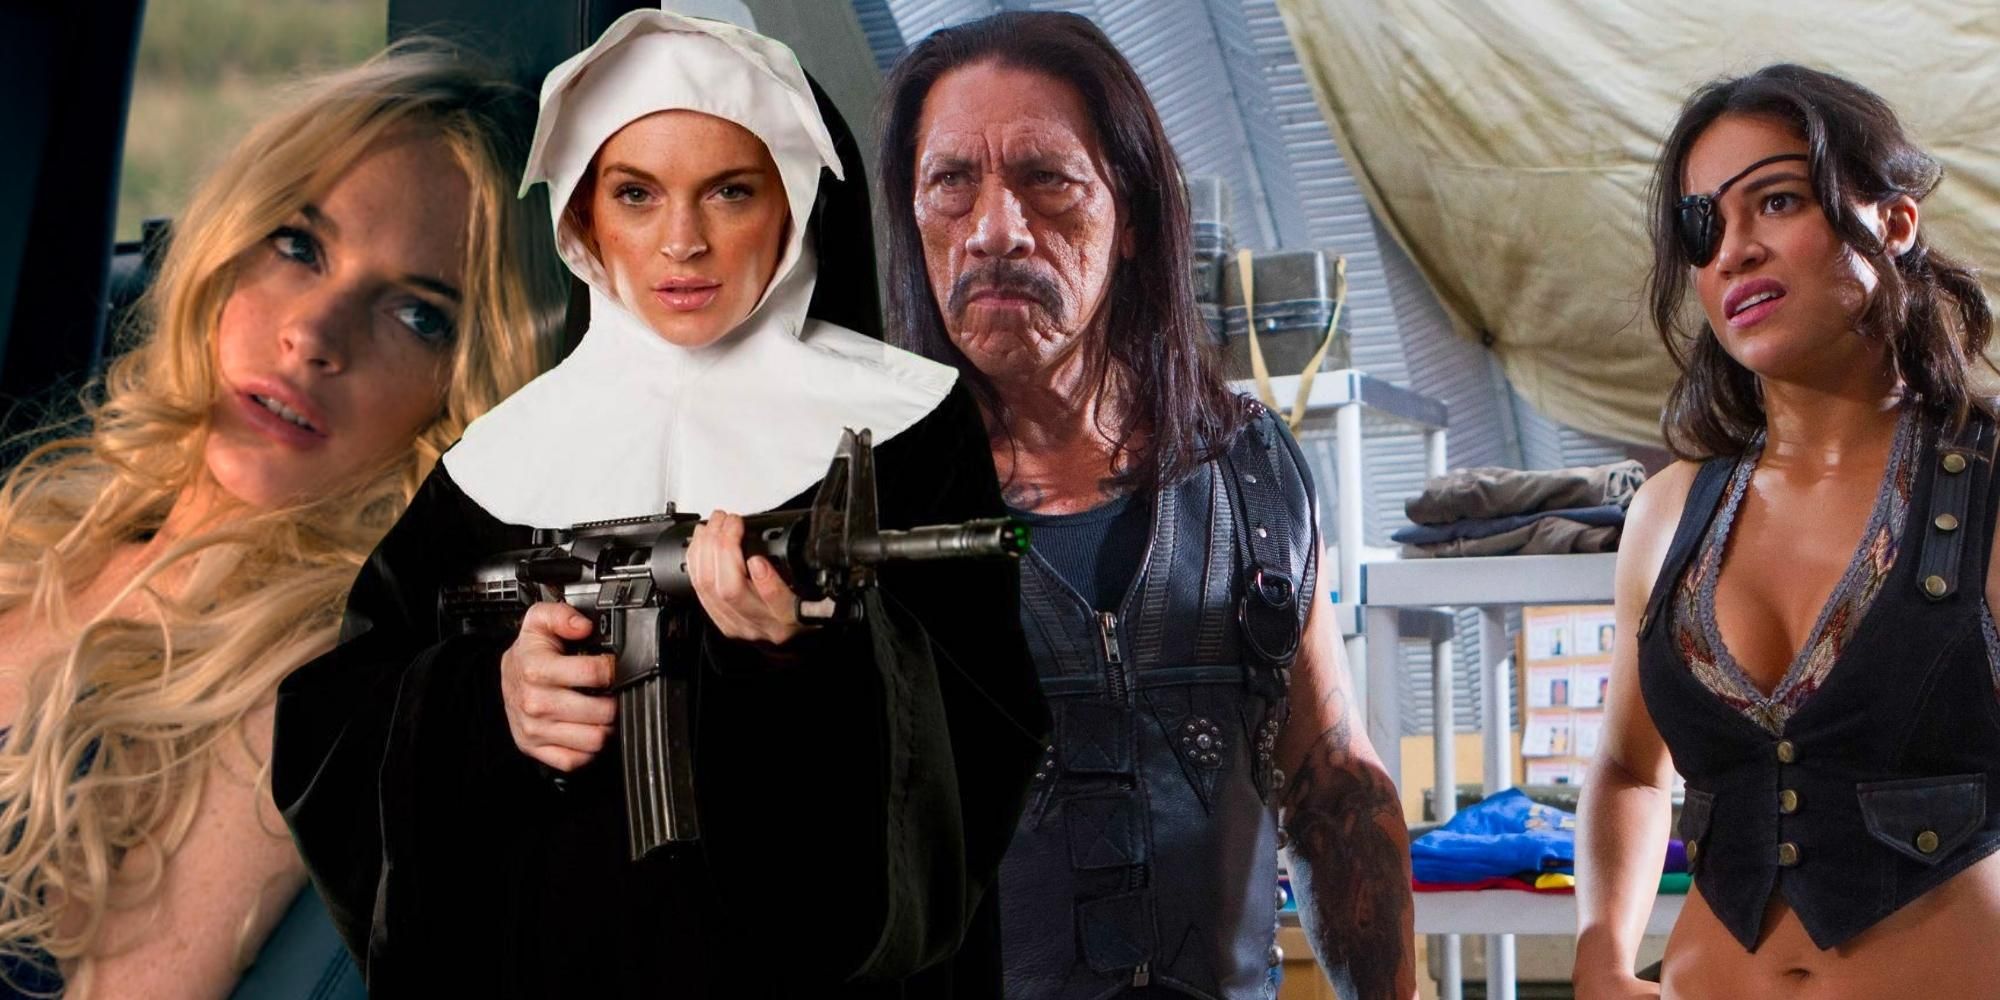 Lindsay Lohan in a car, dressed as a nun holding a gun, Danny Trejo and Michelle Rodriguez in Machete